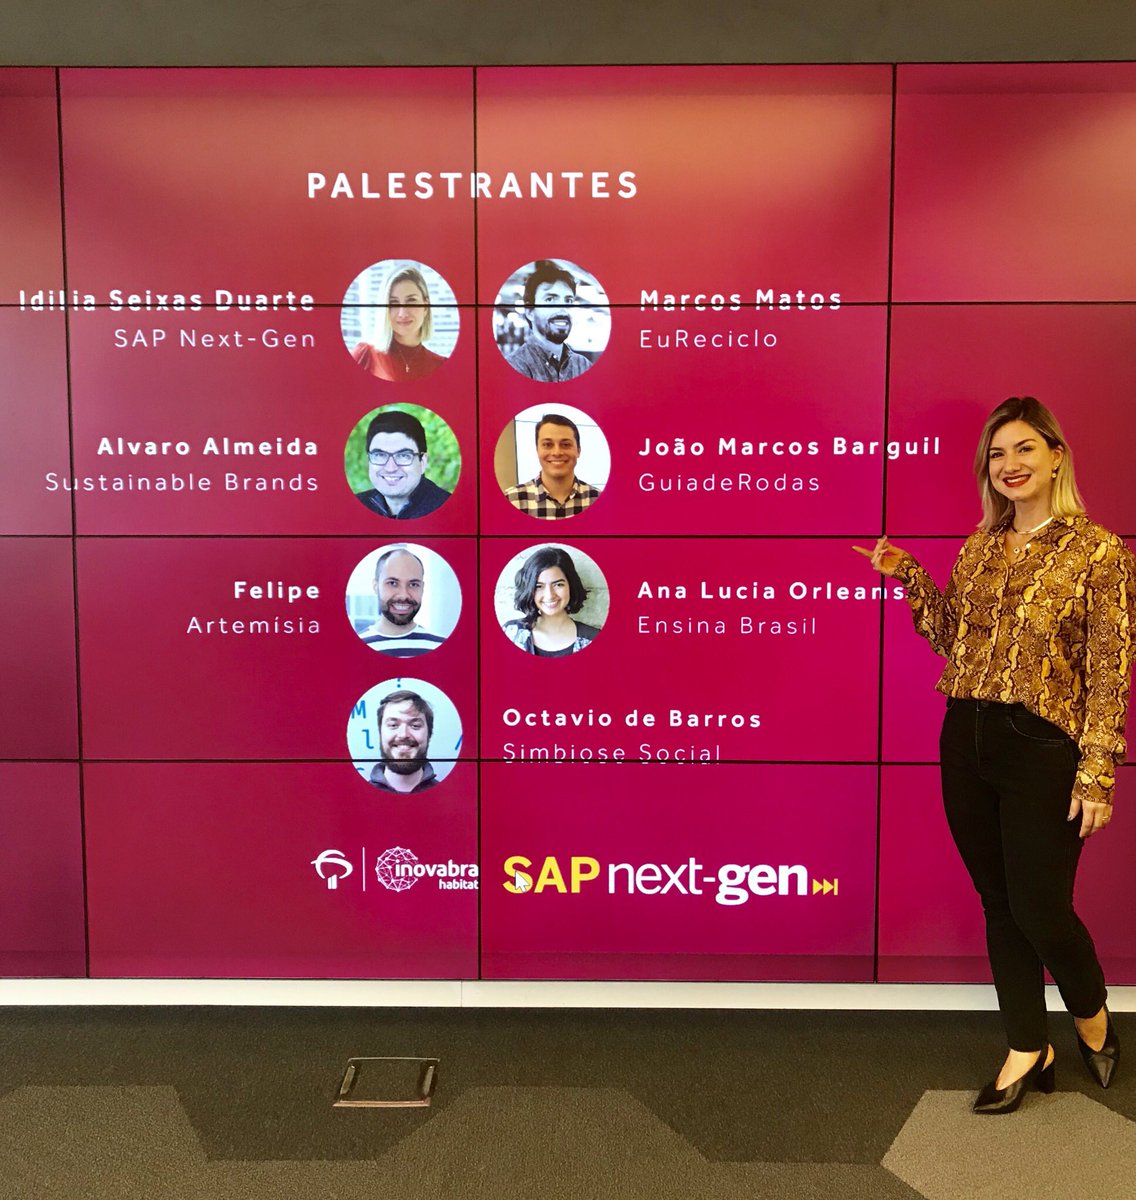 Social Impact Business event is starting soon at our SAP Next-Gen hub in São Paulo, @InovaBra I am very proud to be moderating a panel with impactful social business enterprises from Brazil 🇧🇷 ! @ArtemisiaBrasil @SustainBrands @SAPNextGen @eureciclo @guiaderodas @EnsinaBrasil